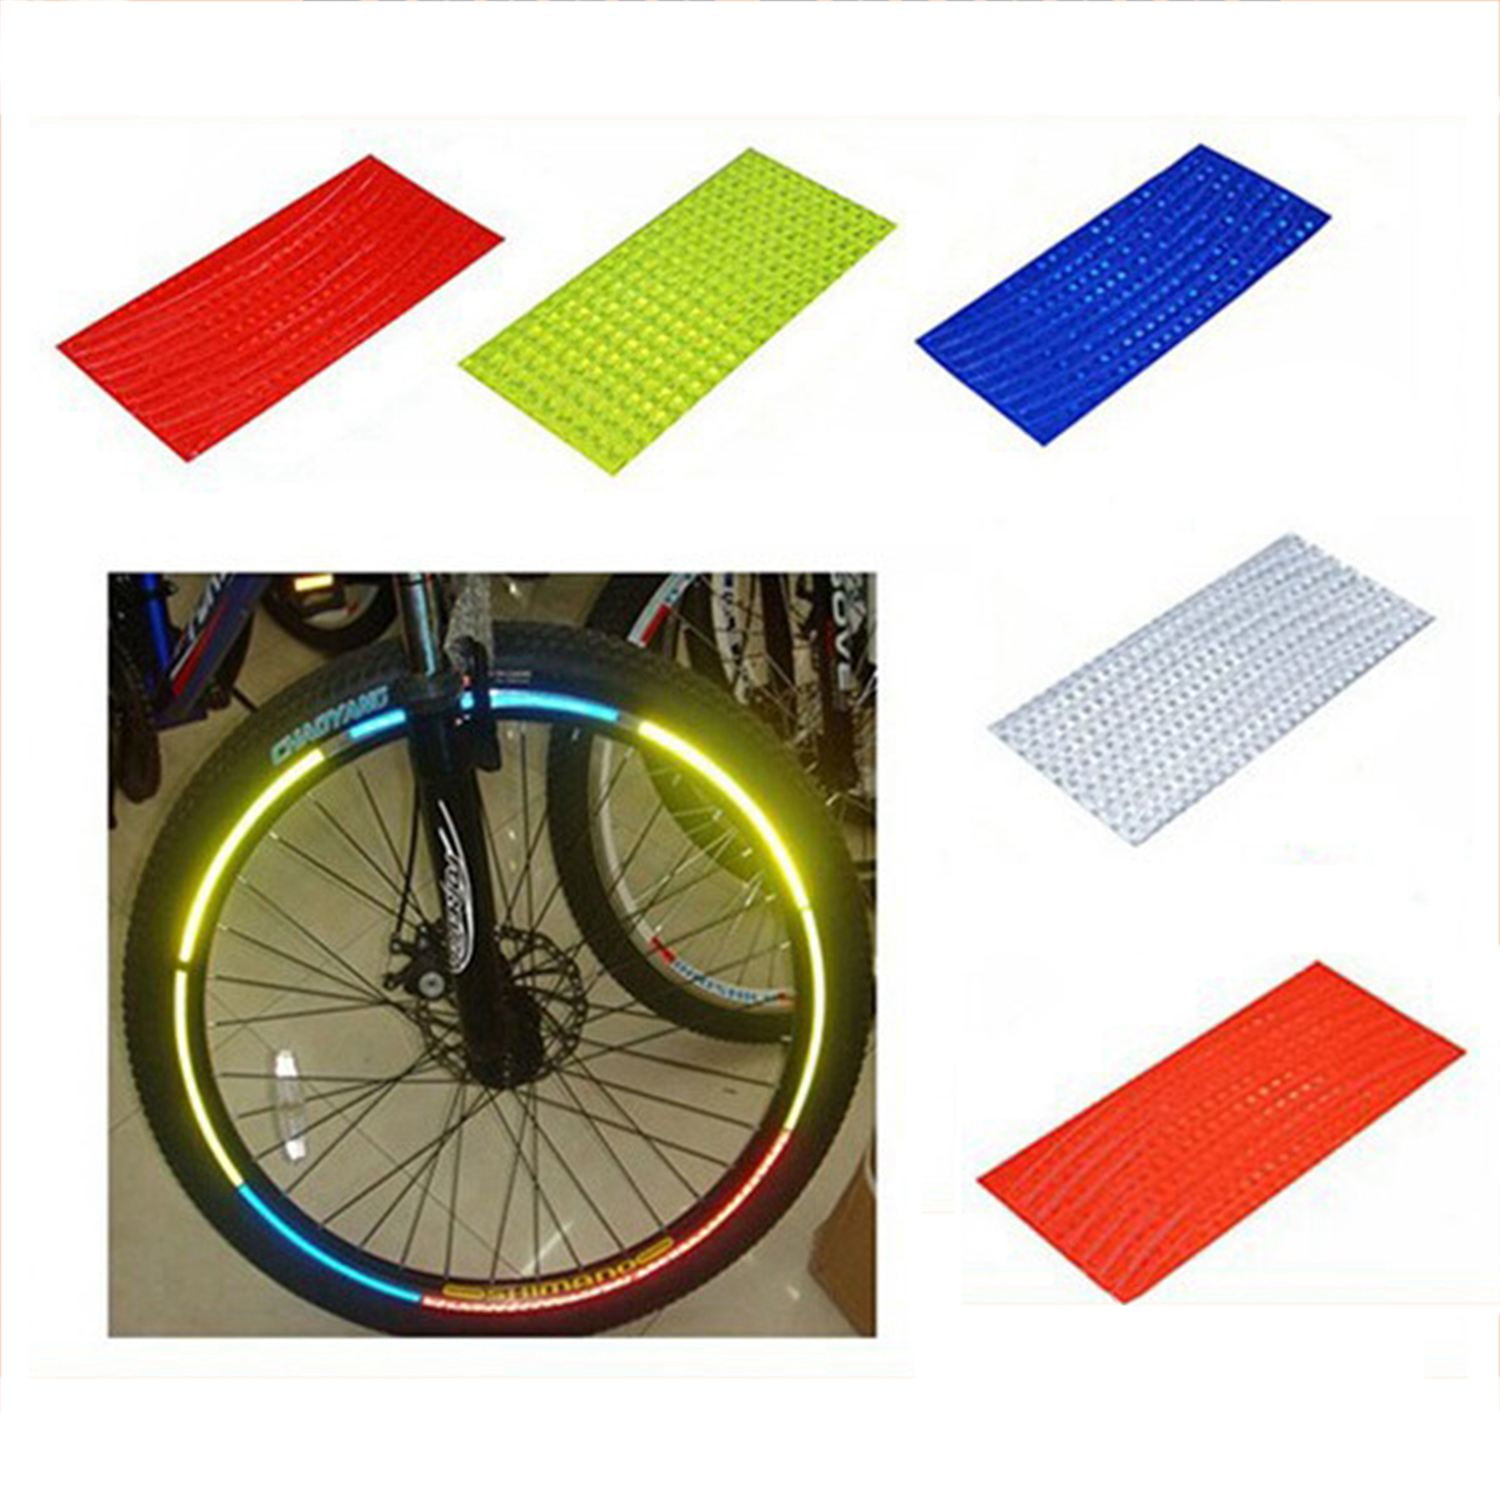 Graphic Decal Reflector  Reflective Strip Bicycle Sticker Safety Tape Vinyl 